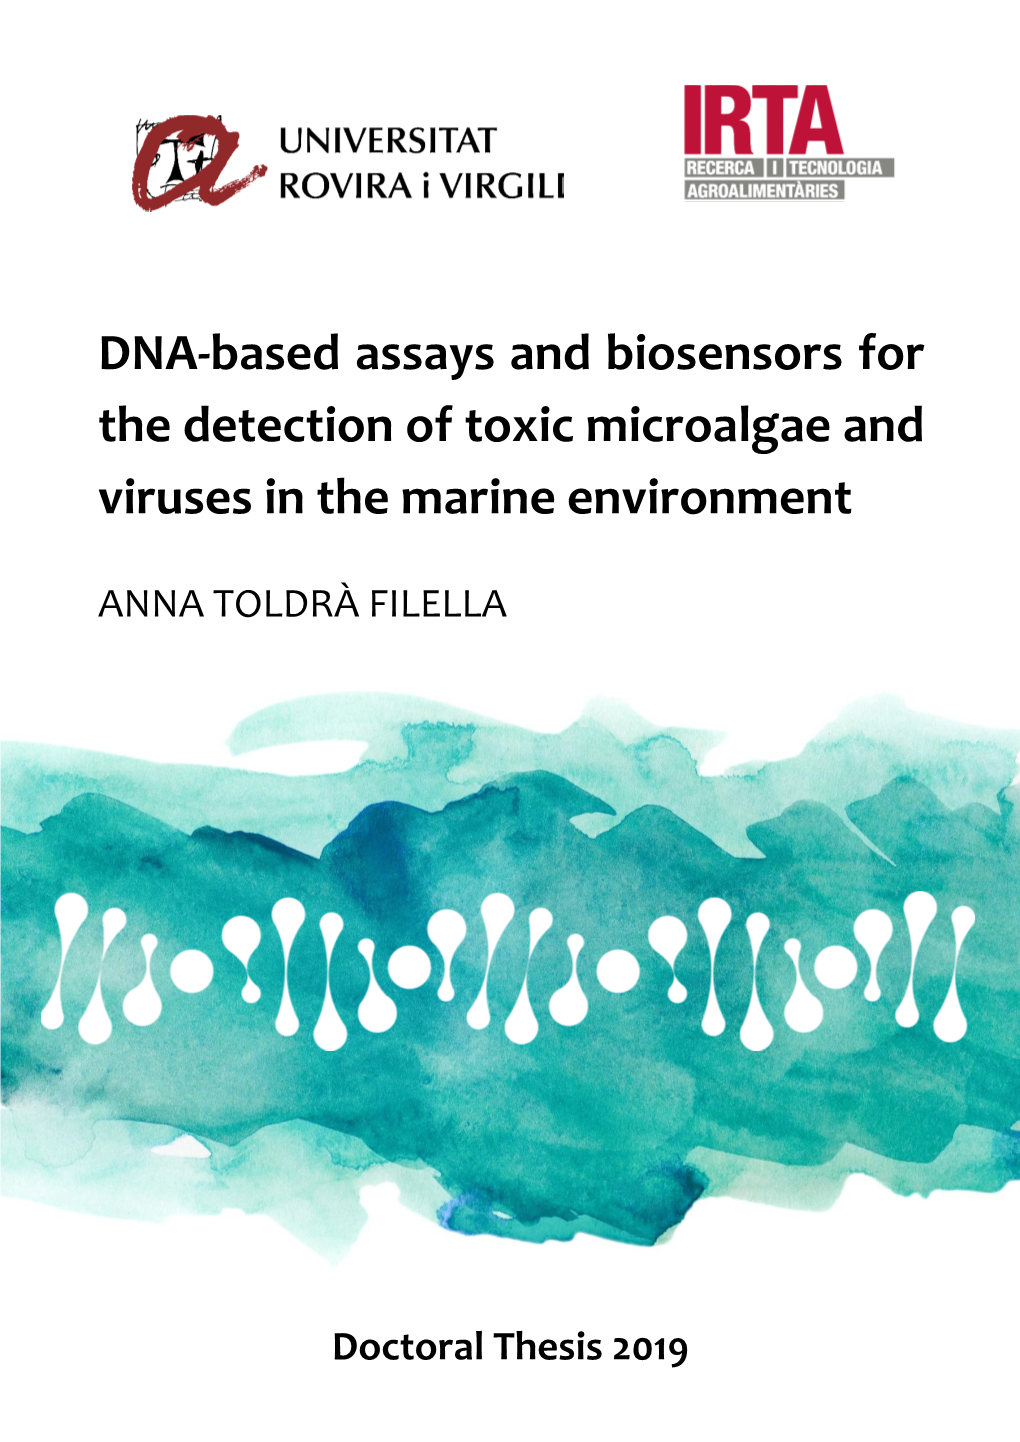 DNA-Based Assays and Biosensors for the Detection of Toxic Microalgae and Viruses in the Marine Environment